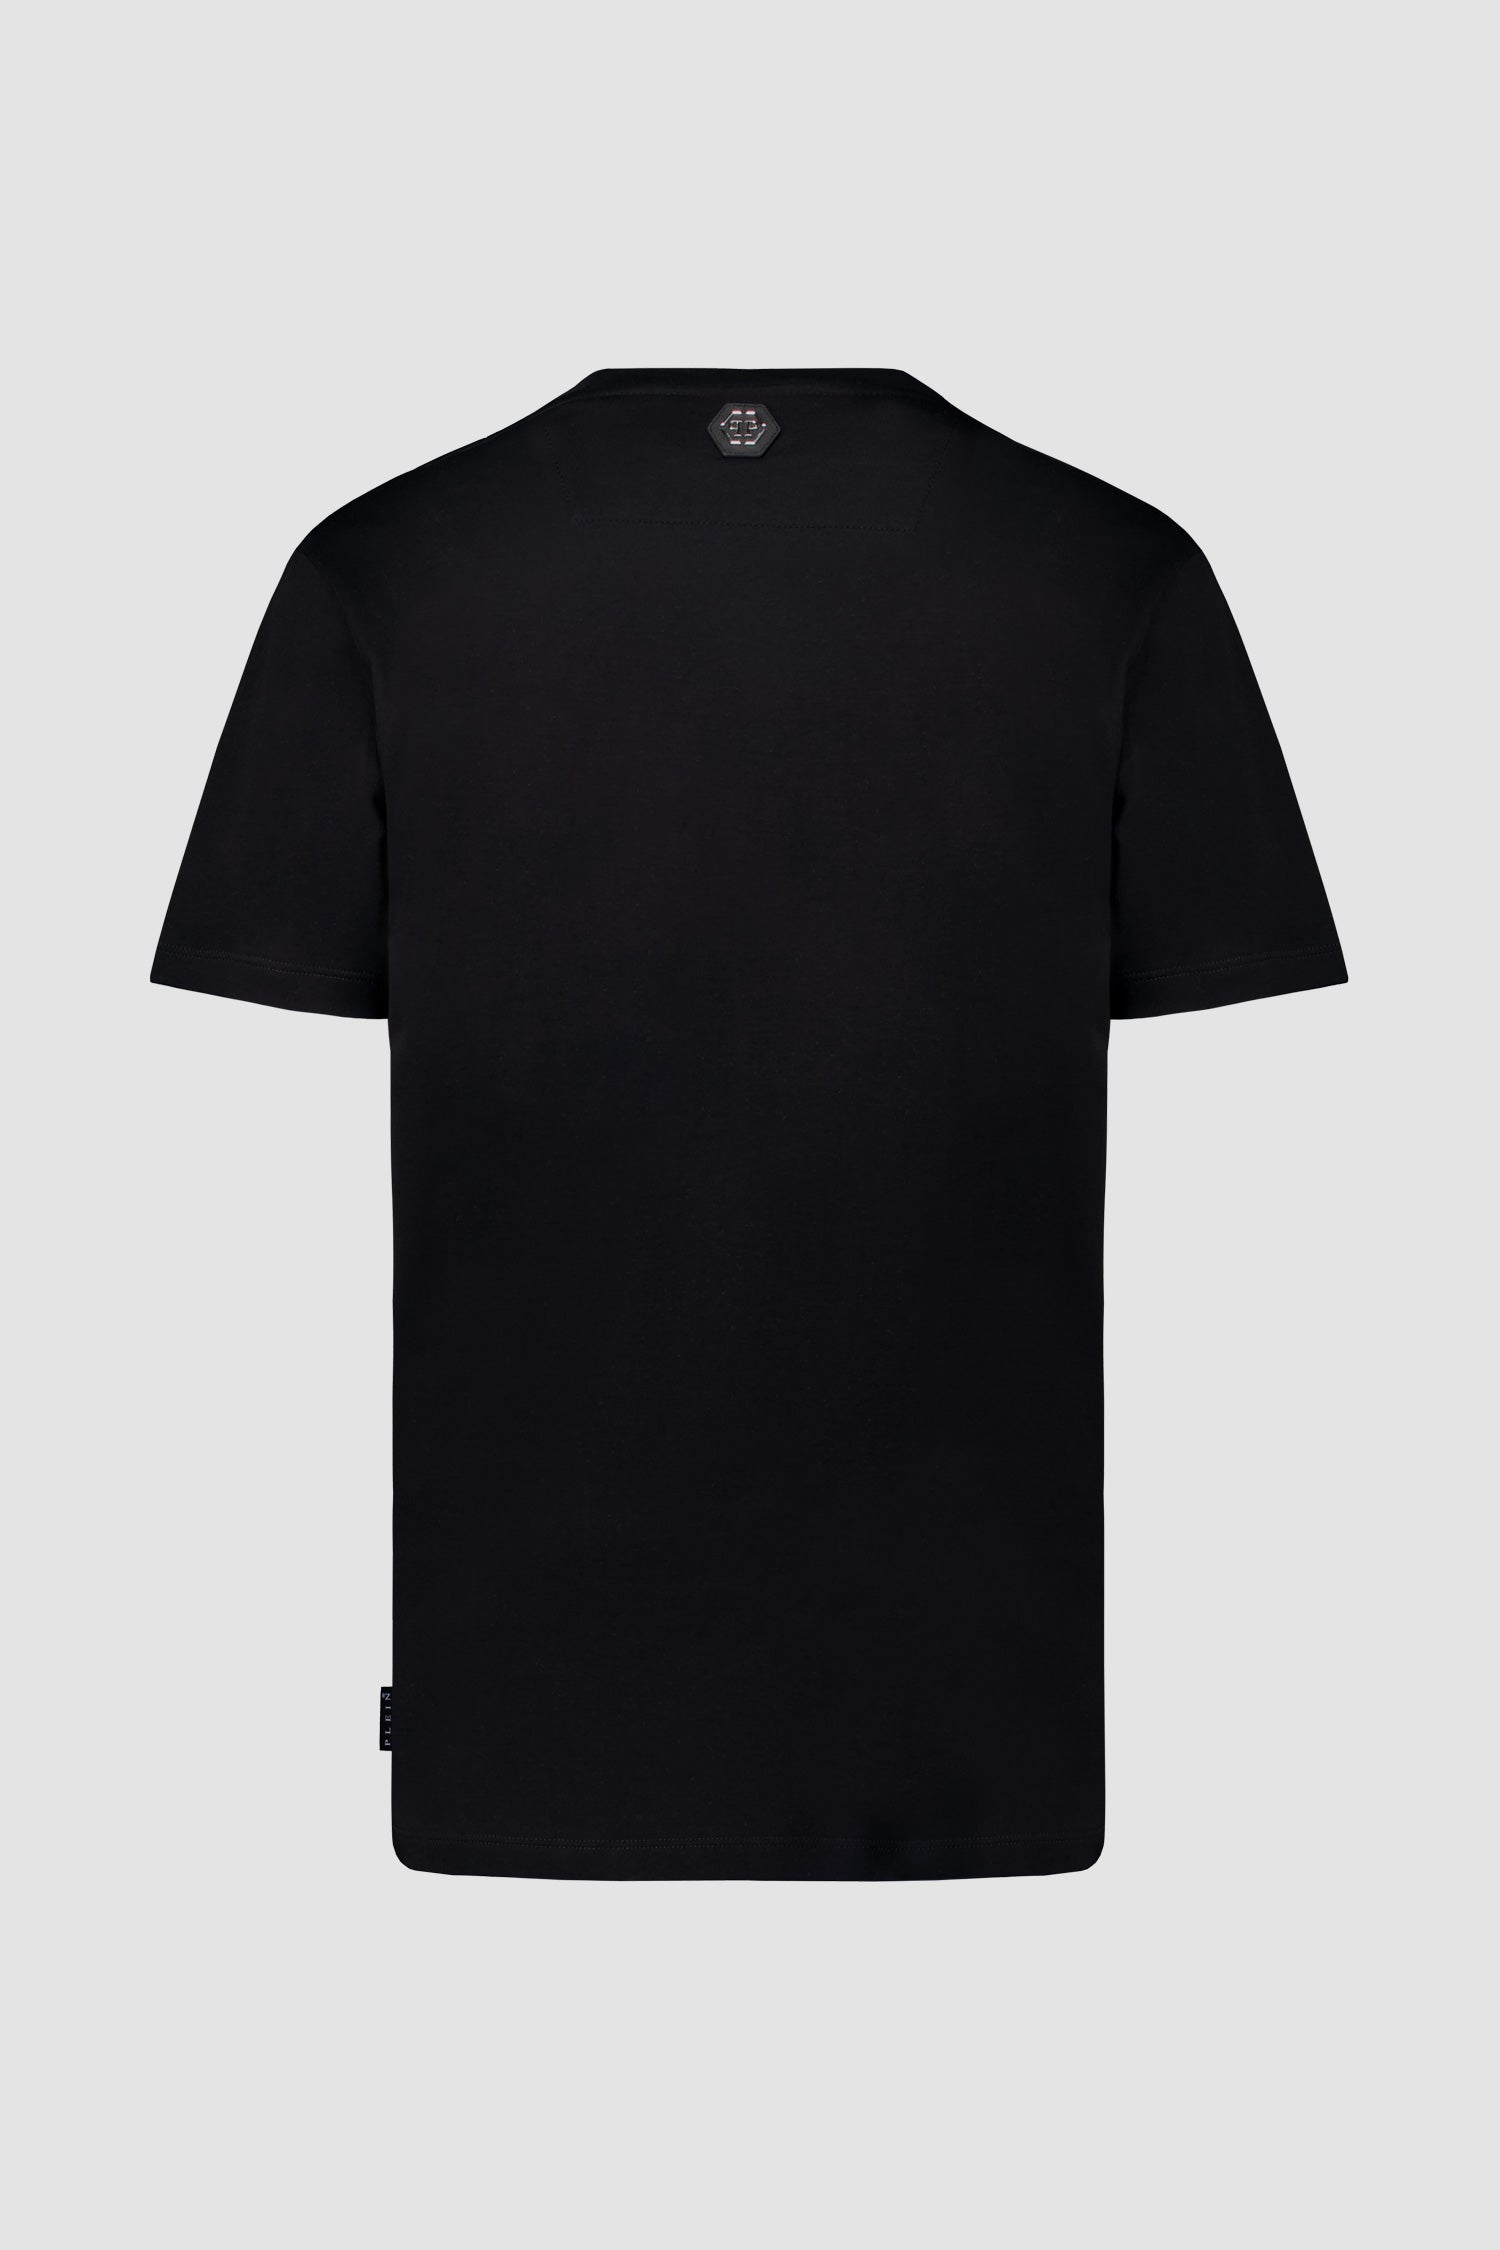 T-Shirt Round Neck SS PP Glass